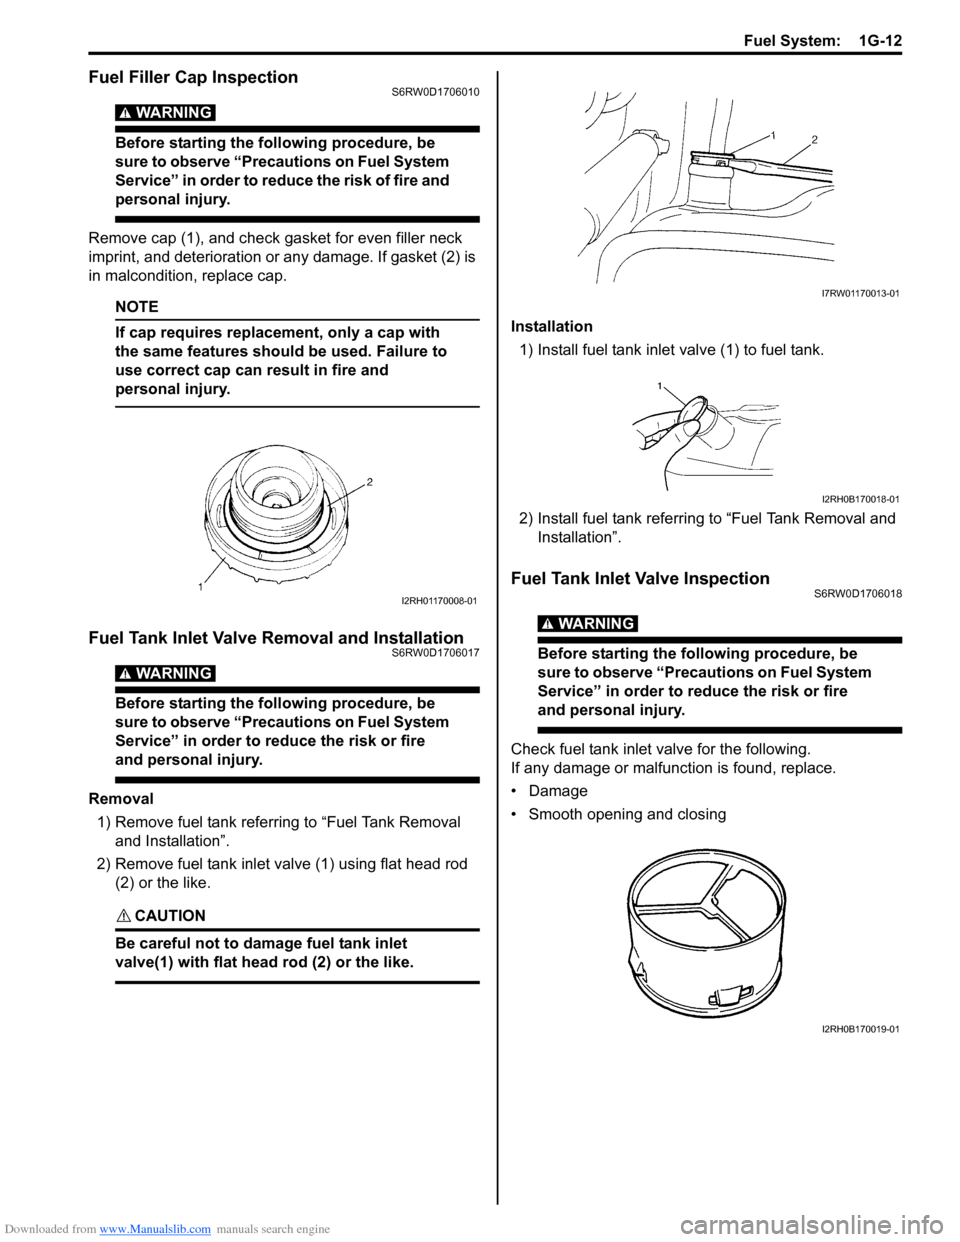 SUZUKI SX4 2006 1.G Service Workshop Manual Downloaded from www.Manualslib.com manuals search engine Fuel System:  1G-12
Fuel Filler Cap InspectionS6RW0D1706010
WARNING! 
Before starting the following procedure, be 
sure to observe “Precautio